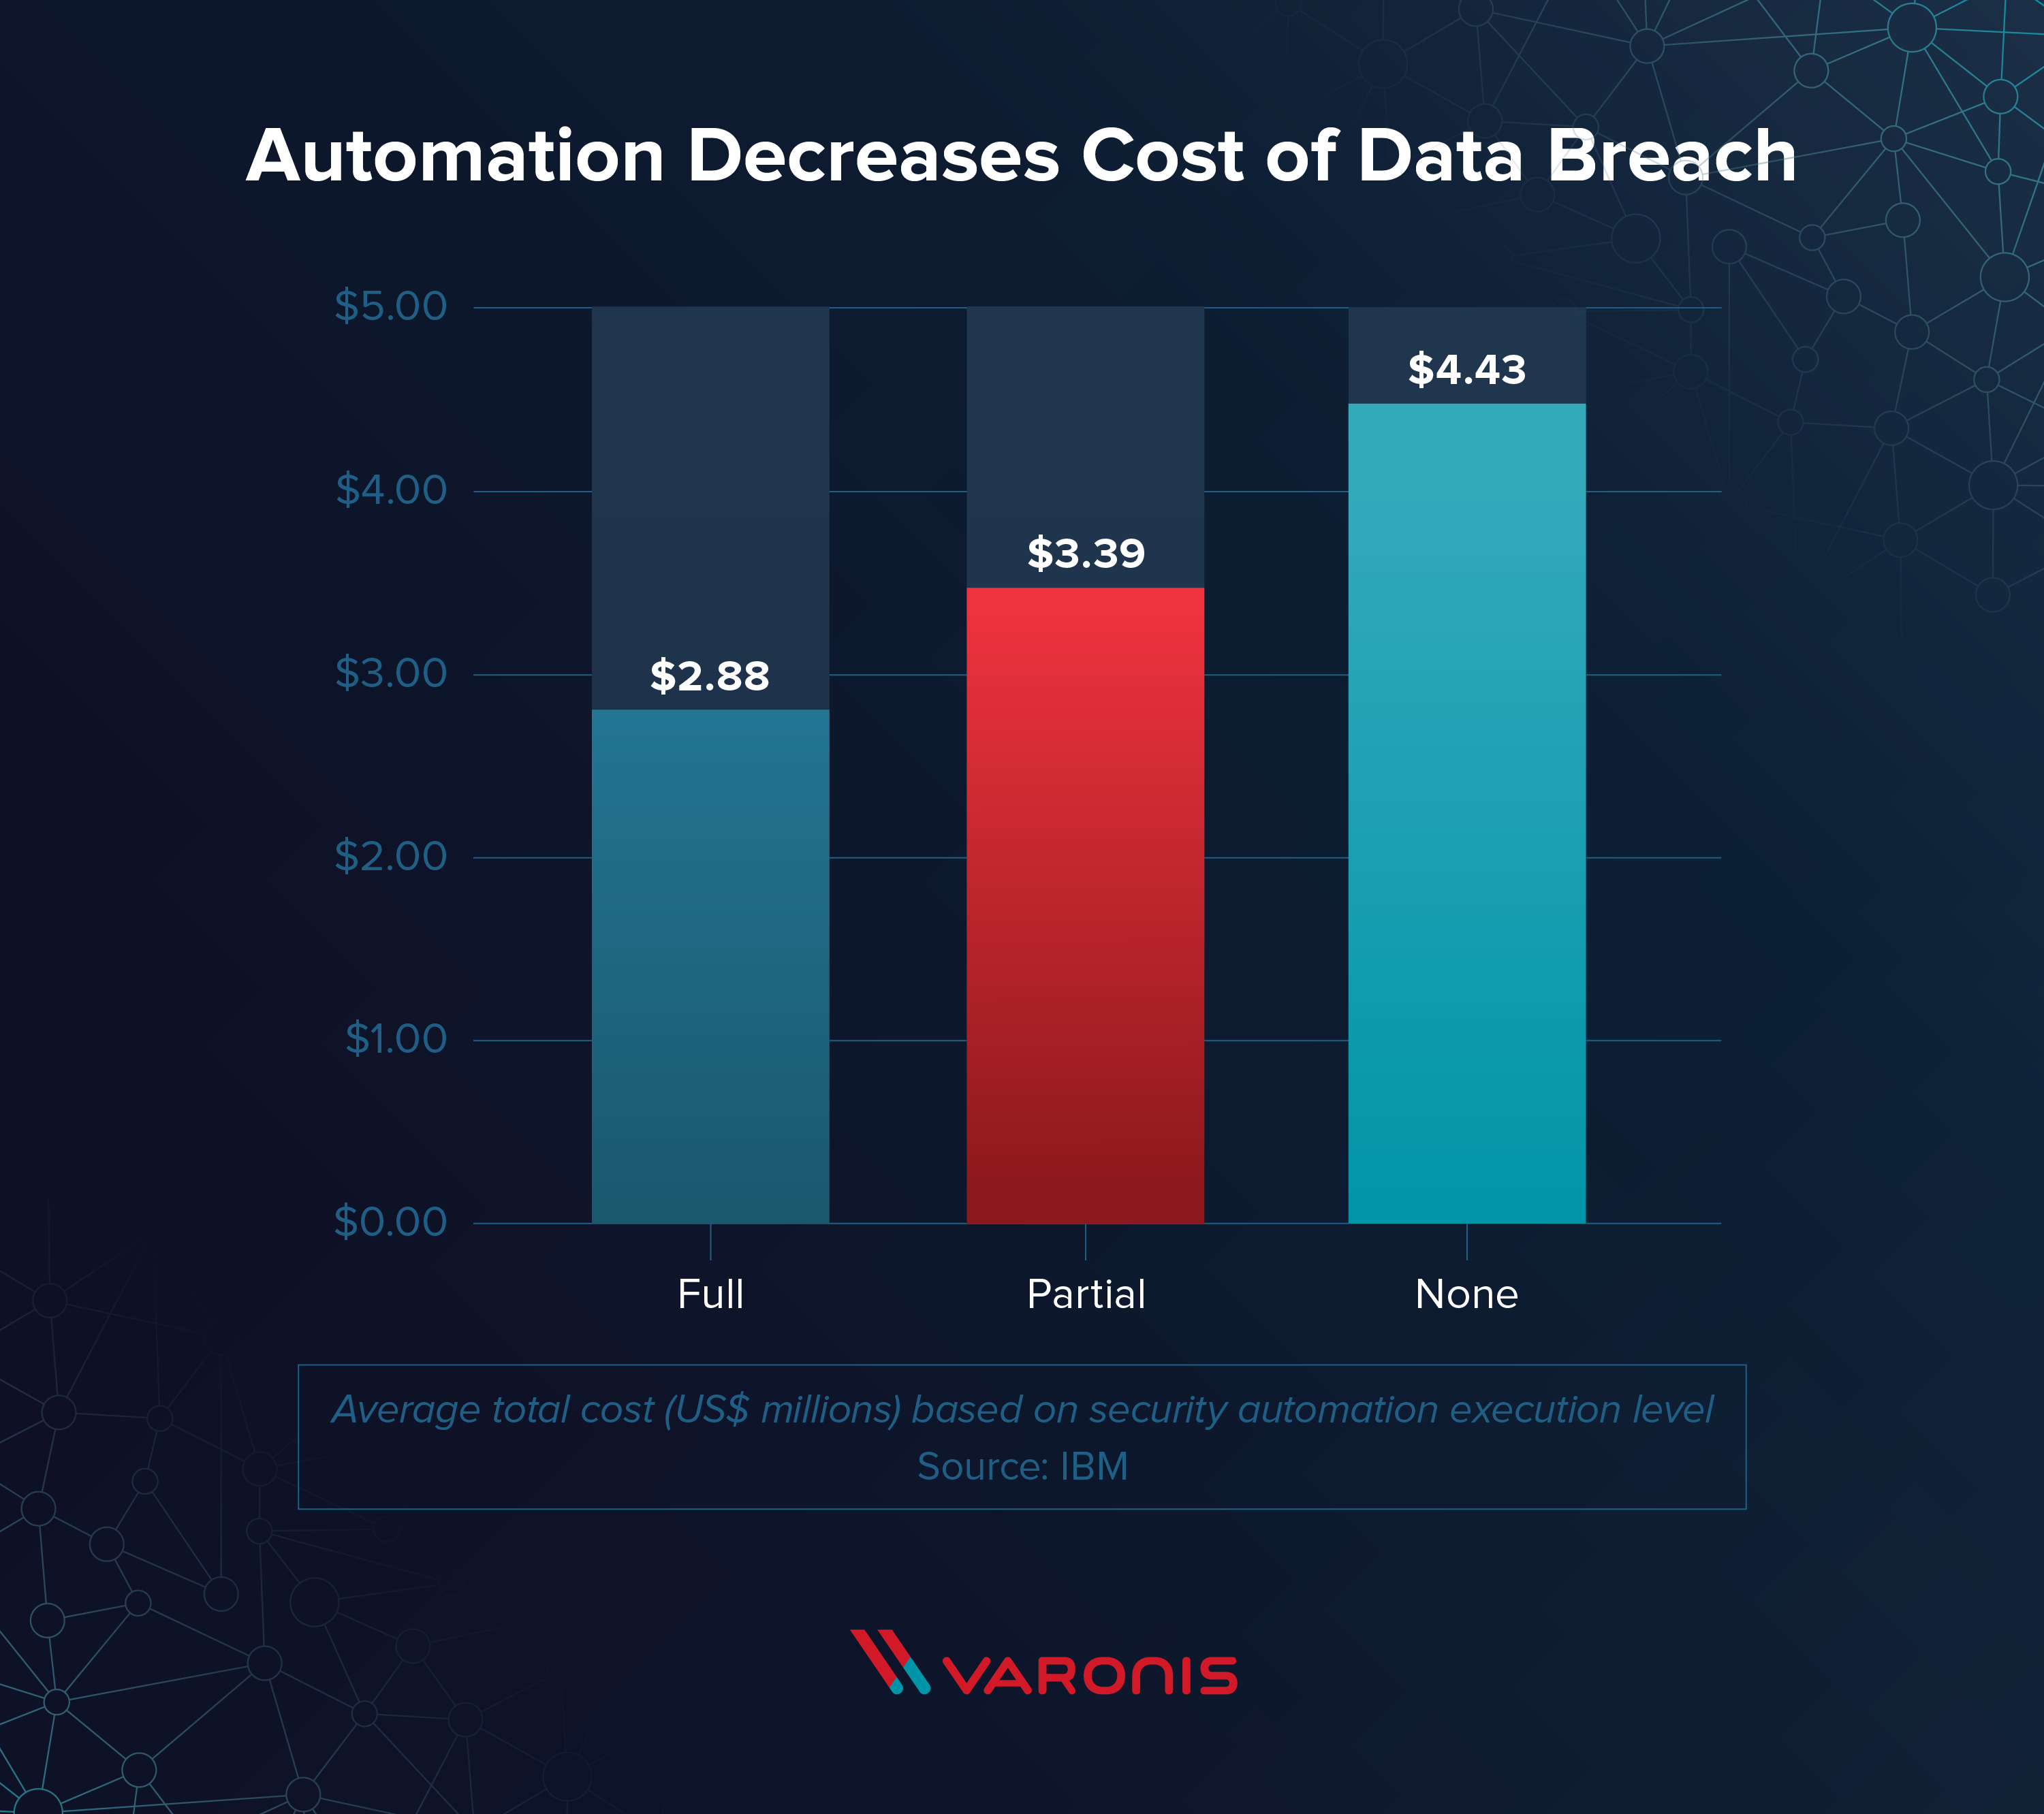 data breach response times automation decreases cost of data breach